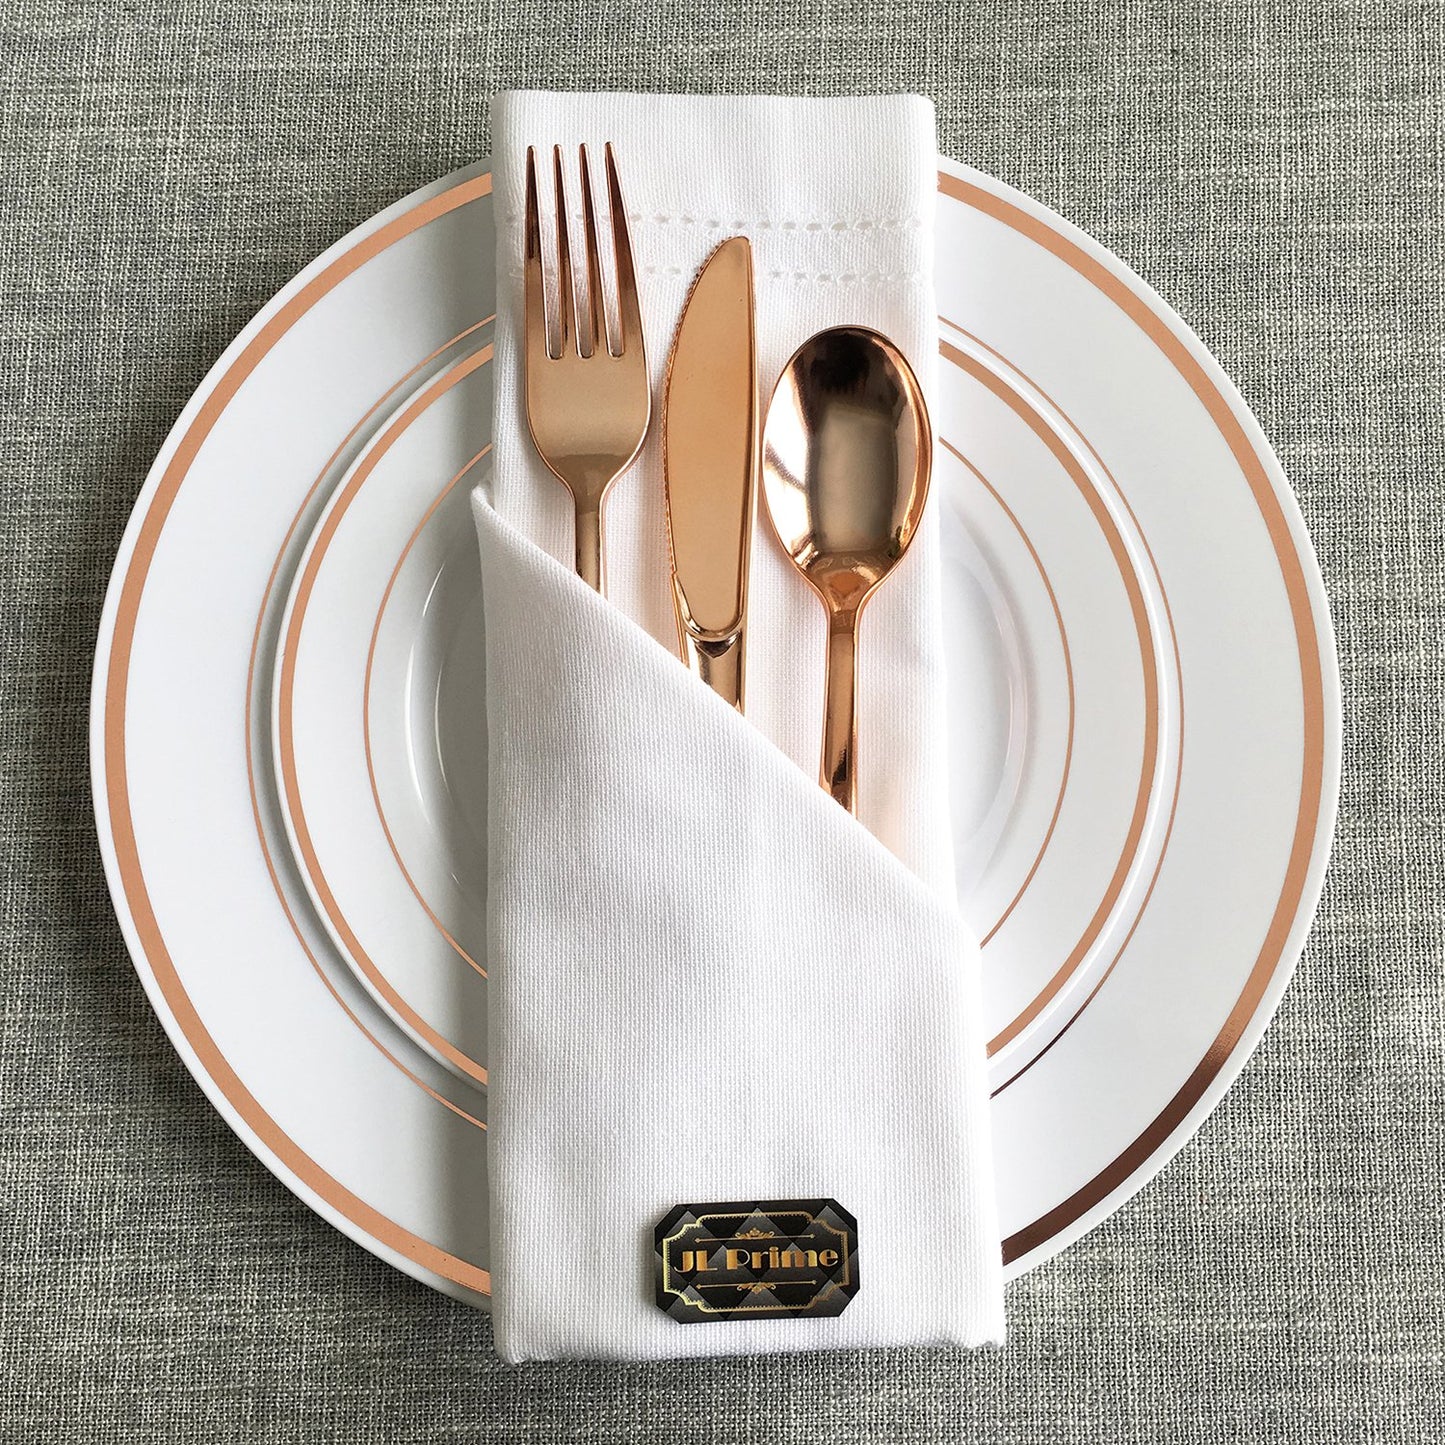 JL Prime 25 Piece 10 Inch Rose Gold Plastic Dinner Plates Bulk Set, Heavy Duty Reusable Disposable Plastic Plates with Rose Gold Rim for Party and Wedding